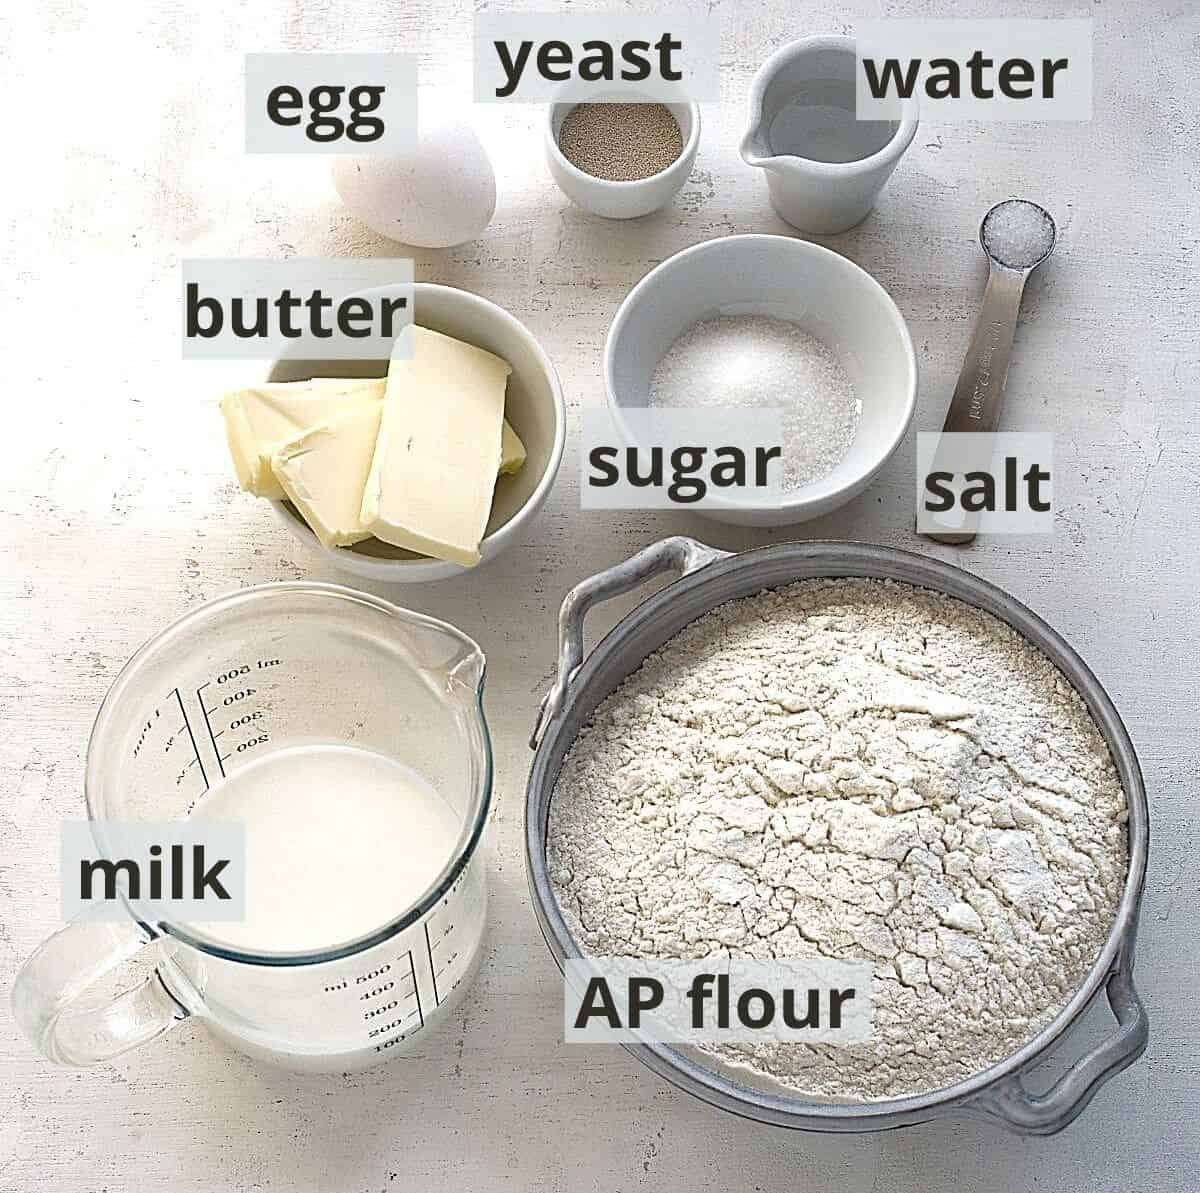 Slovak paska Easter bread ingredients listed with captions.